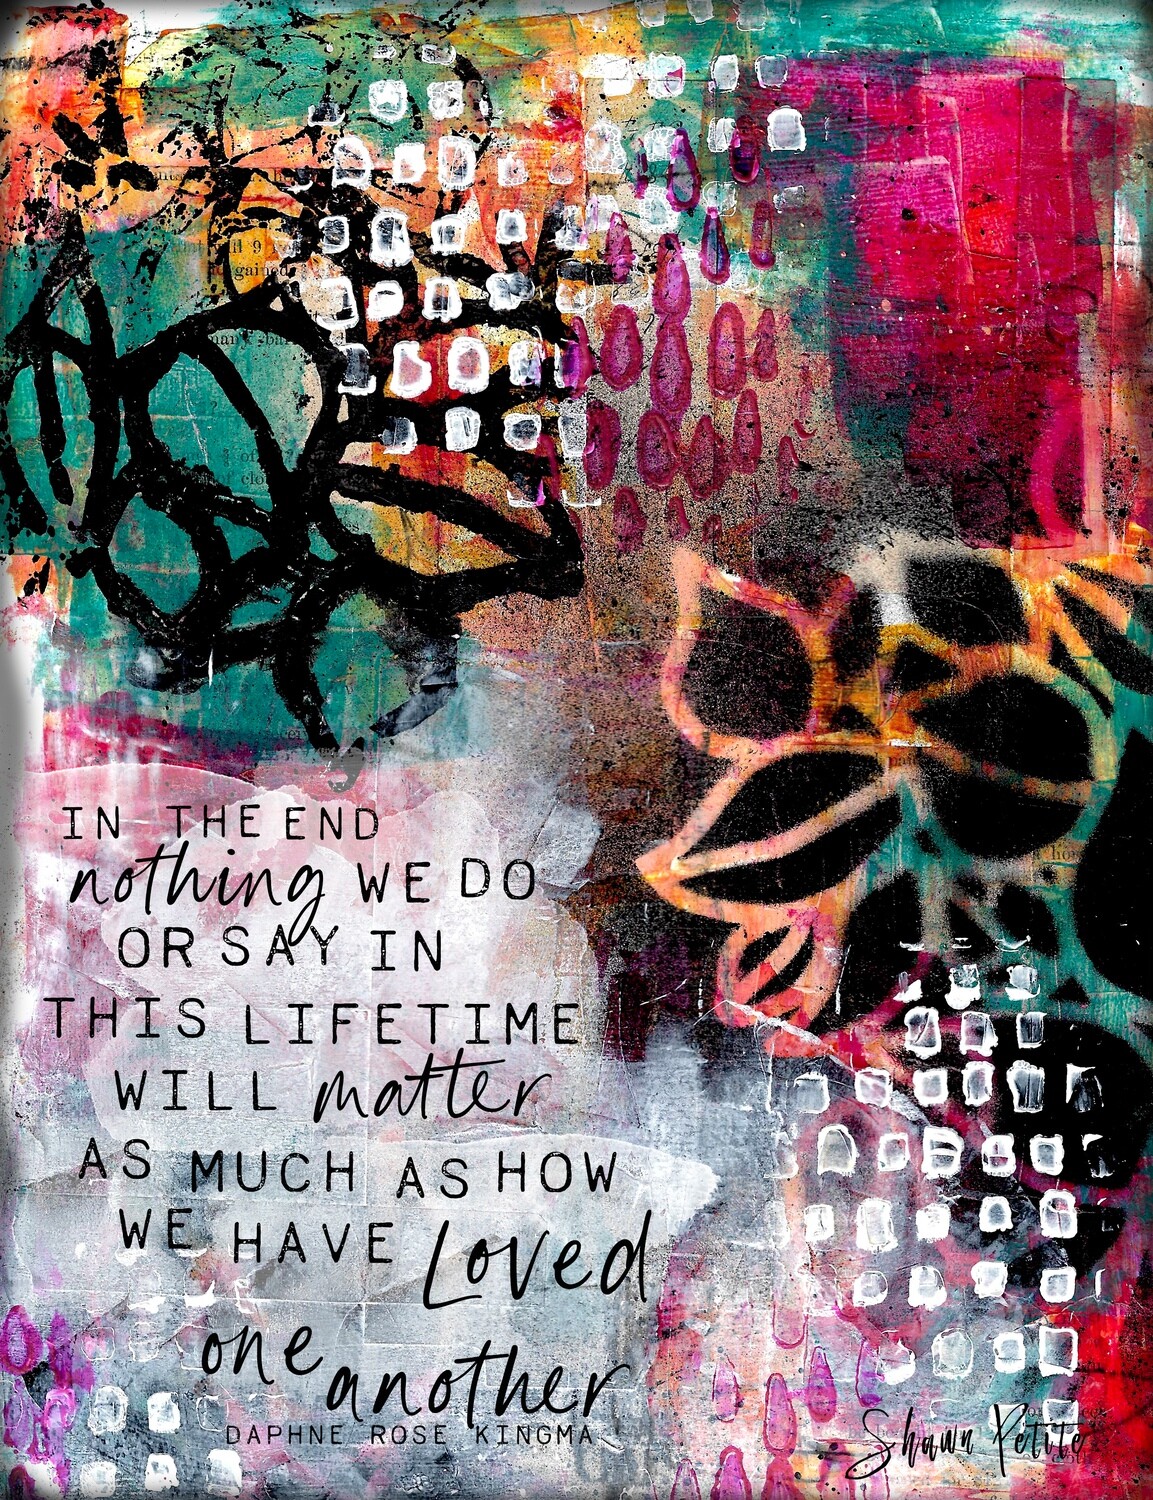 "Love one another" Print on Wood and Print to be Framed